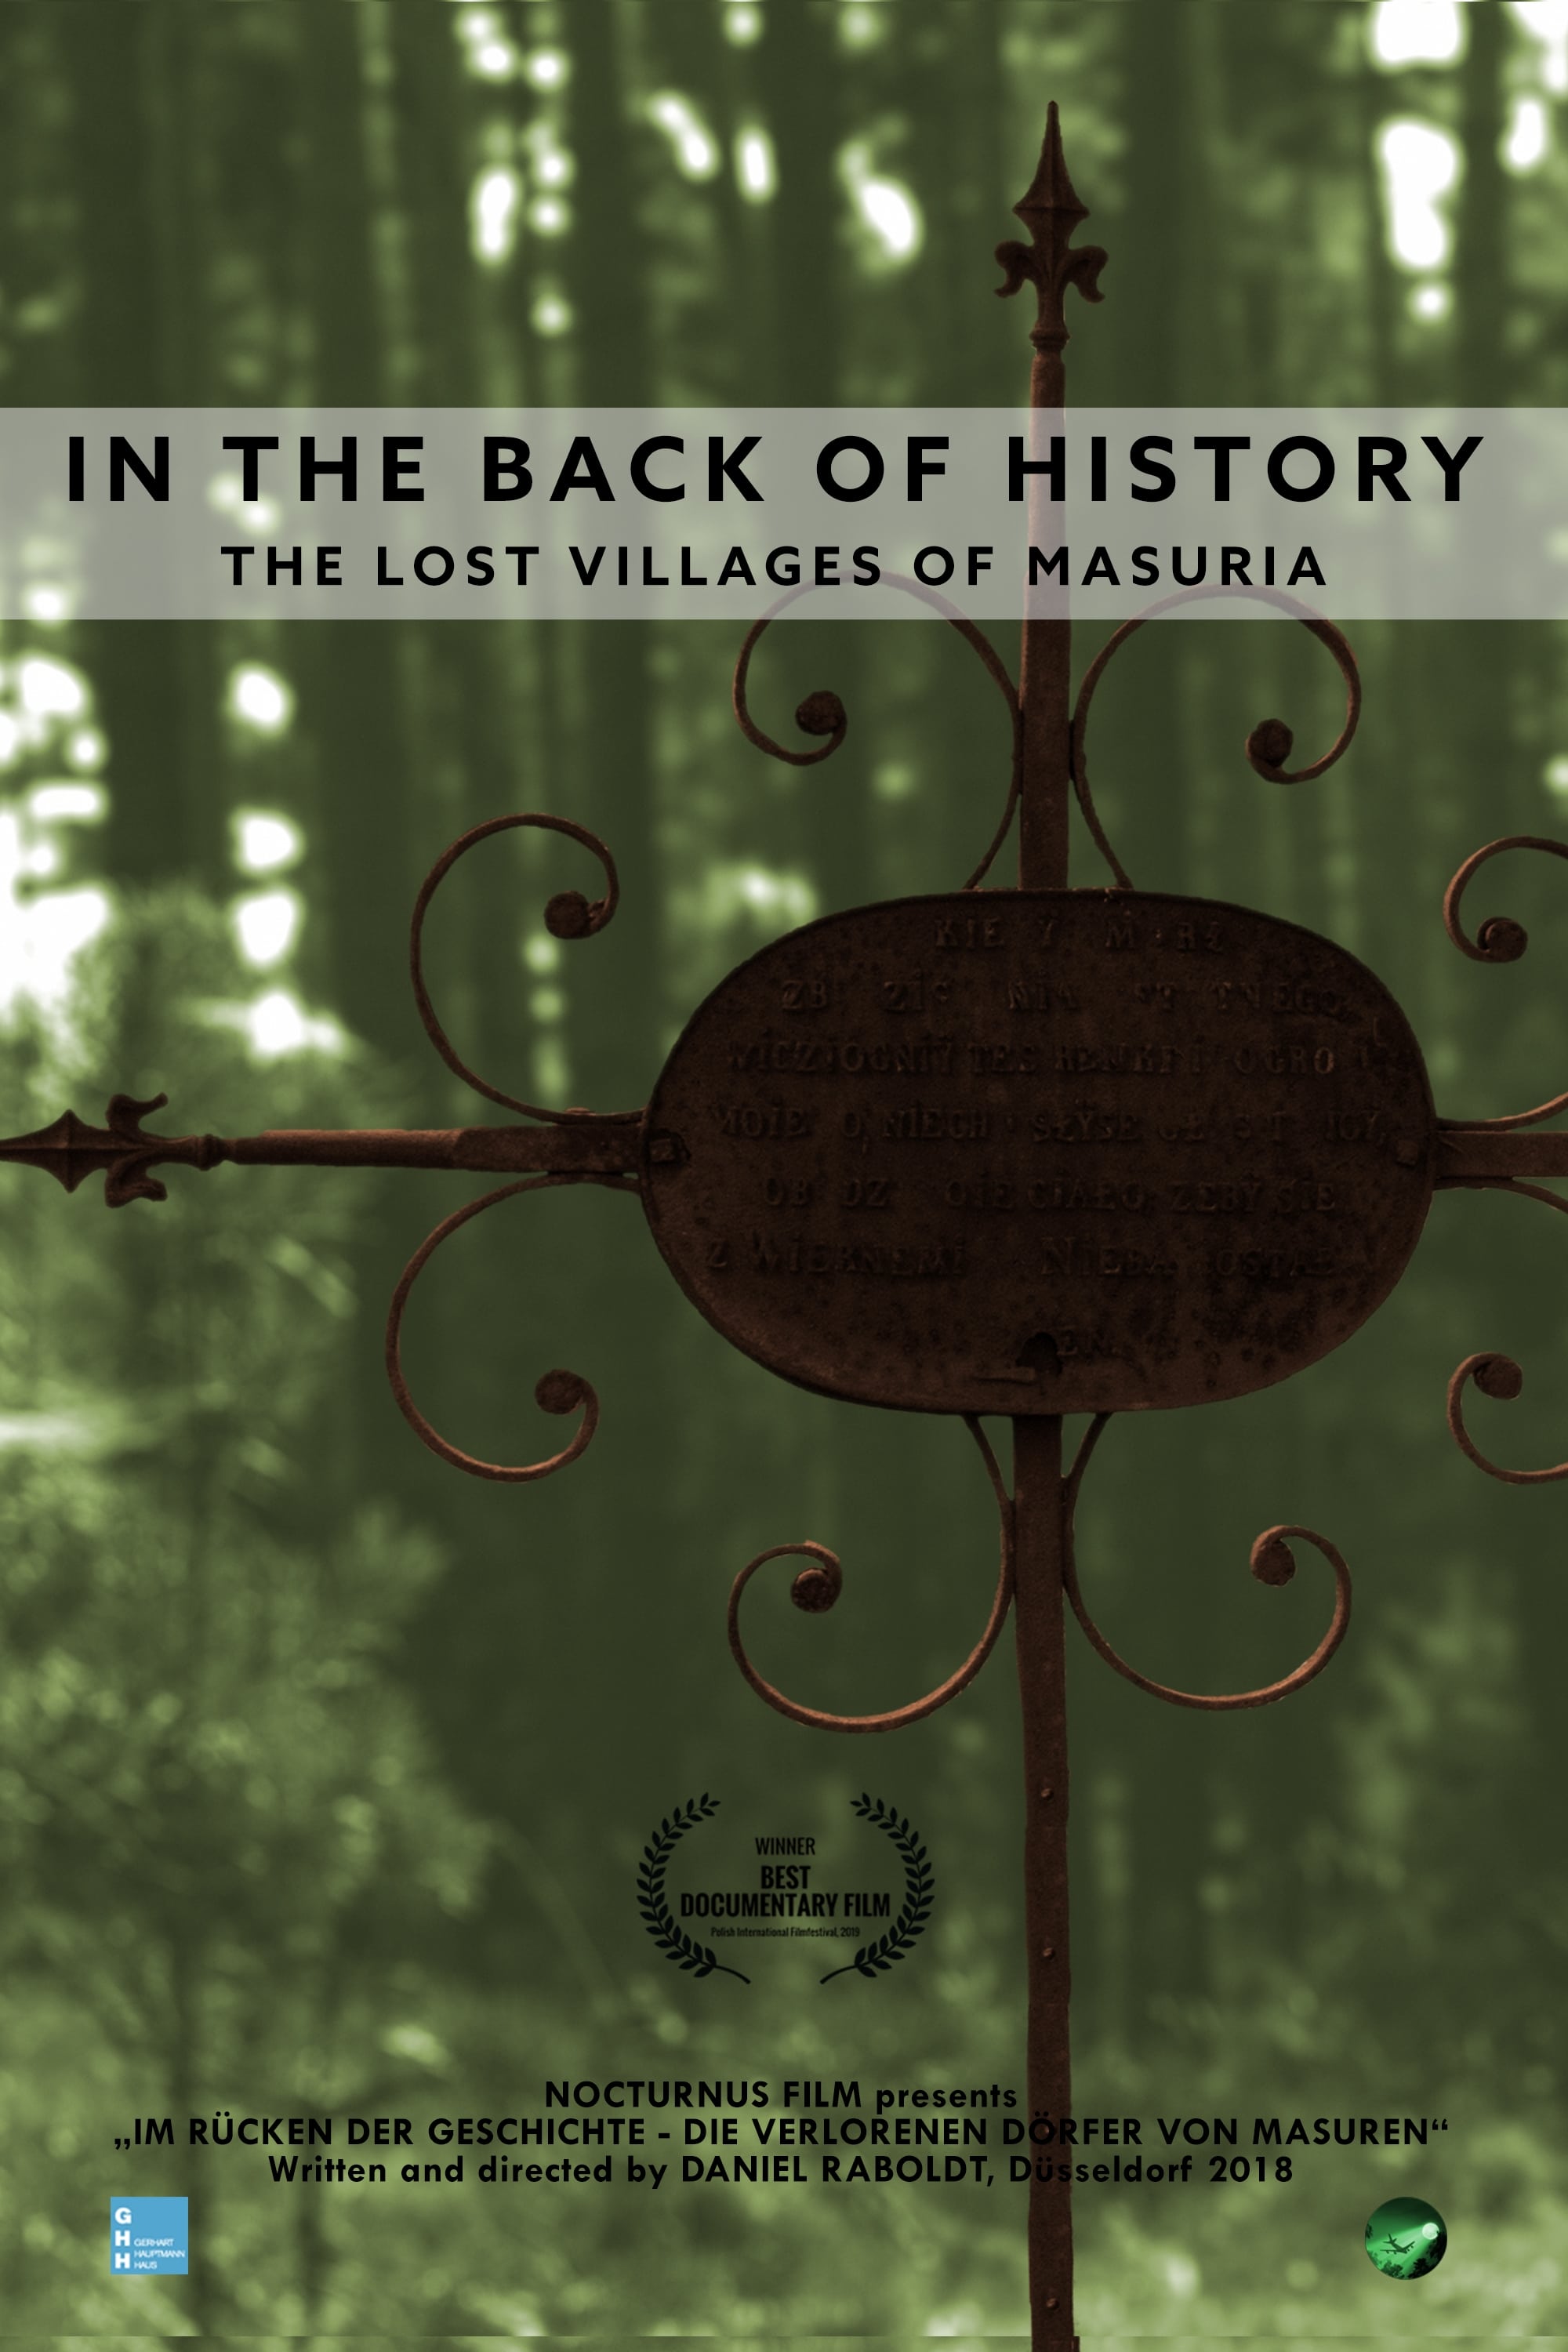 In the back of history - The lost villages of Masuria